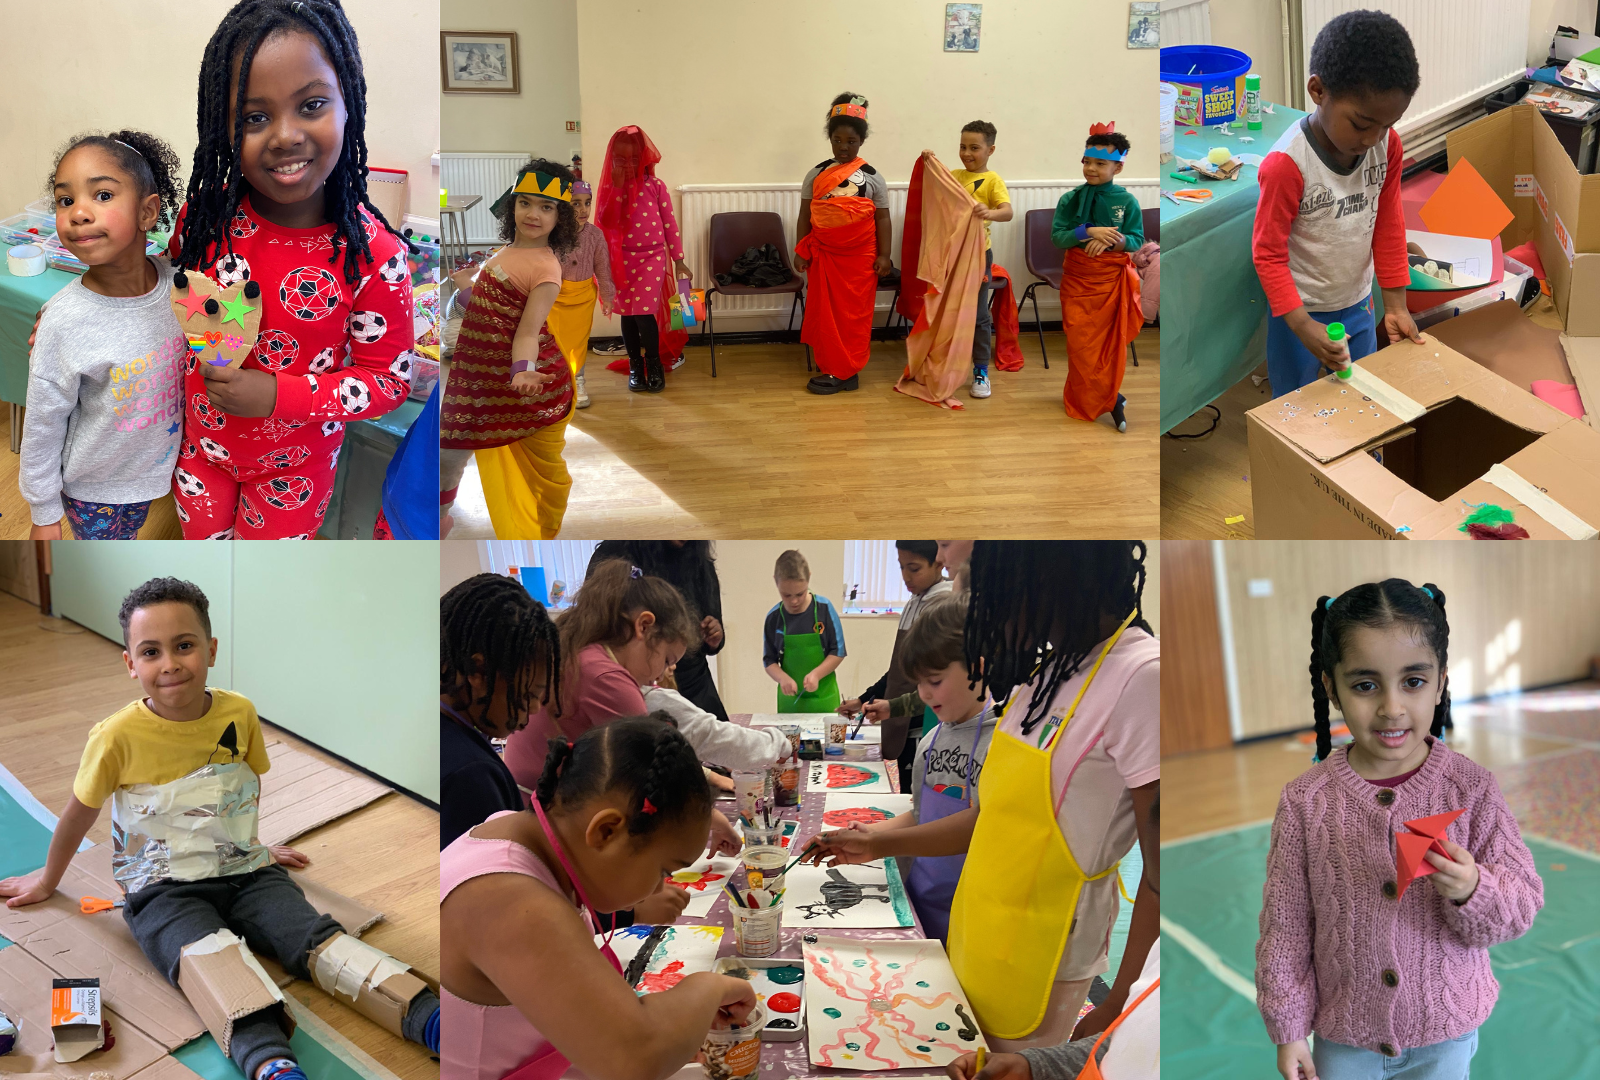 The image is a collage of 6 photos from Curiosity Club of different activities. There are children dressed up in fabric, at a table painting, showing crafts they've made, and creating craft projects.